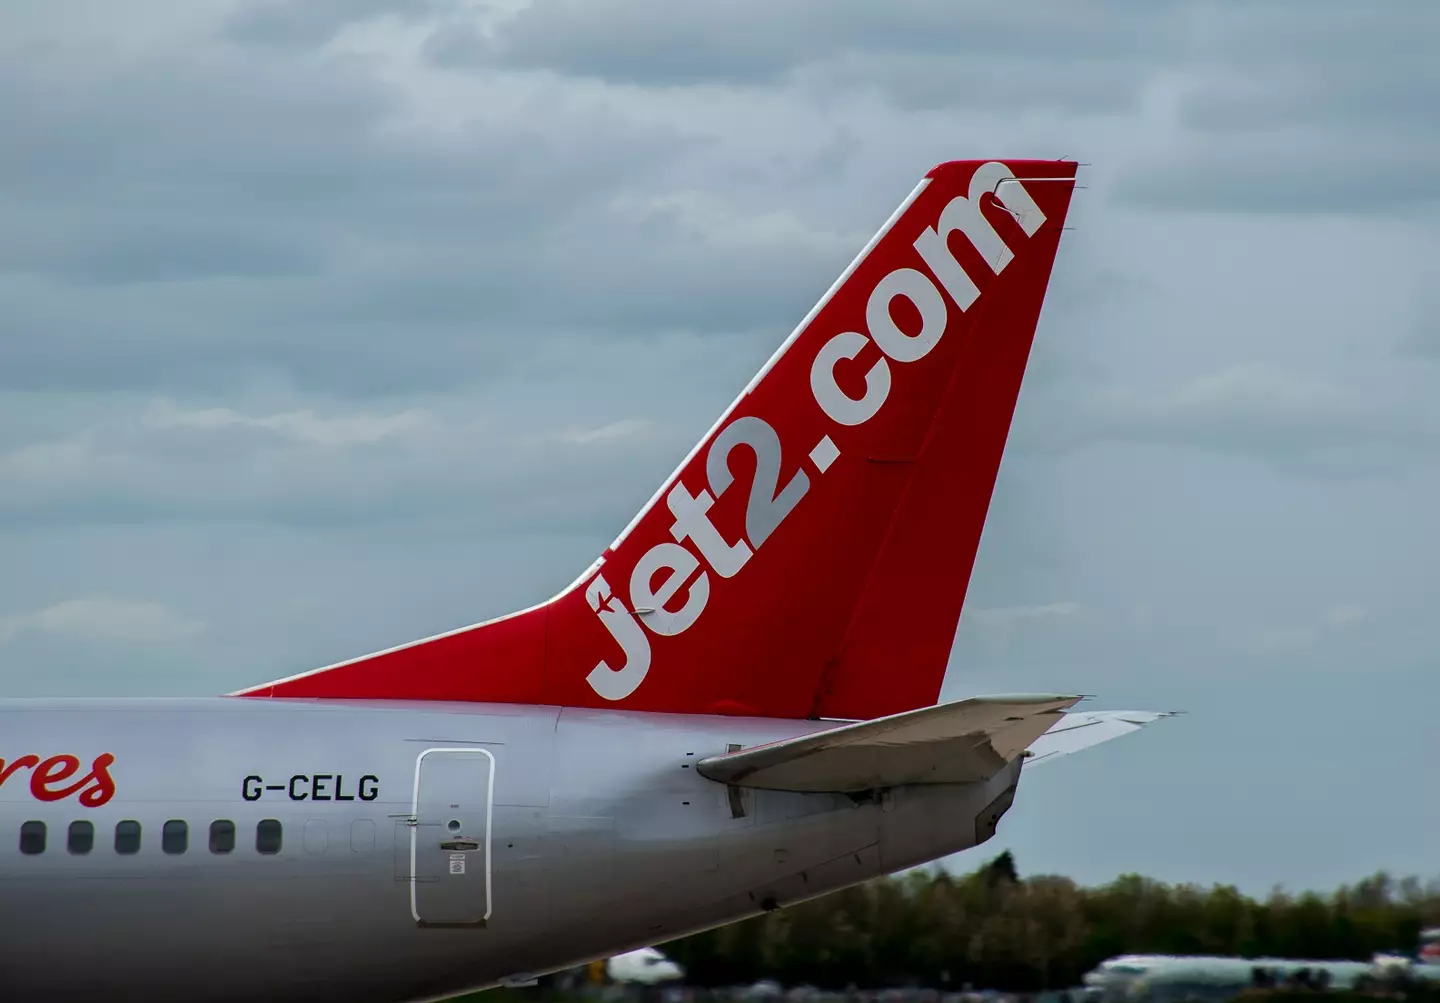 A dad restrained a woman who stripped nude and tried to storm the cockpit during a Jet2 flight.